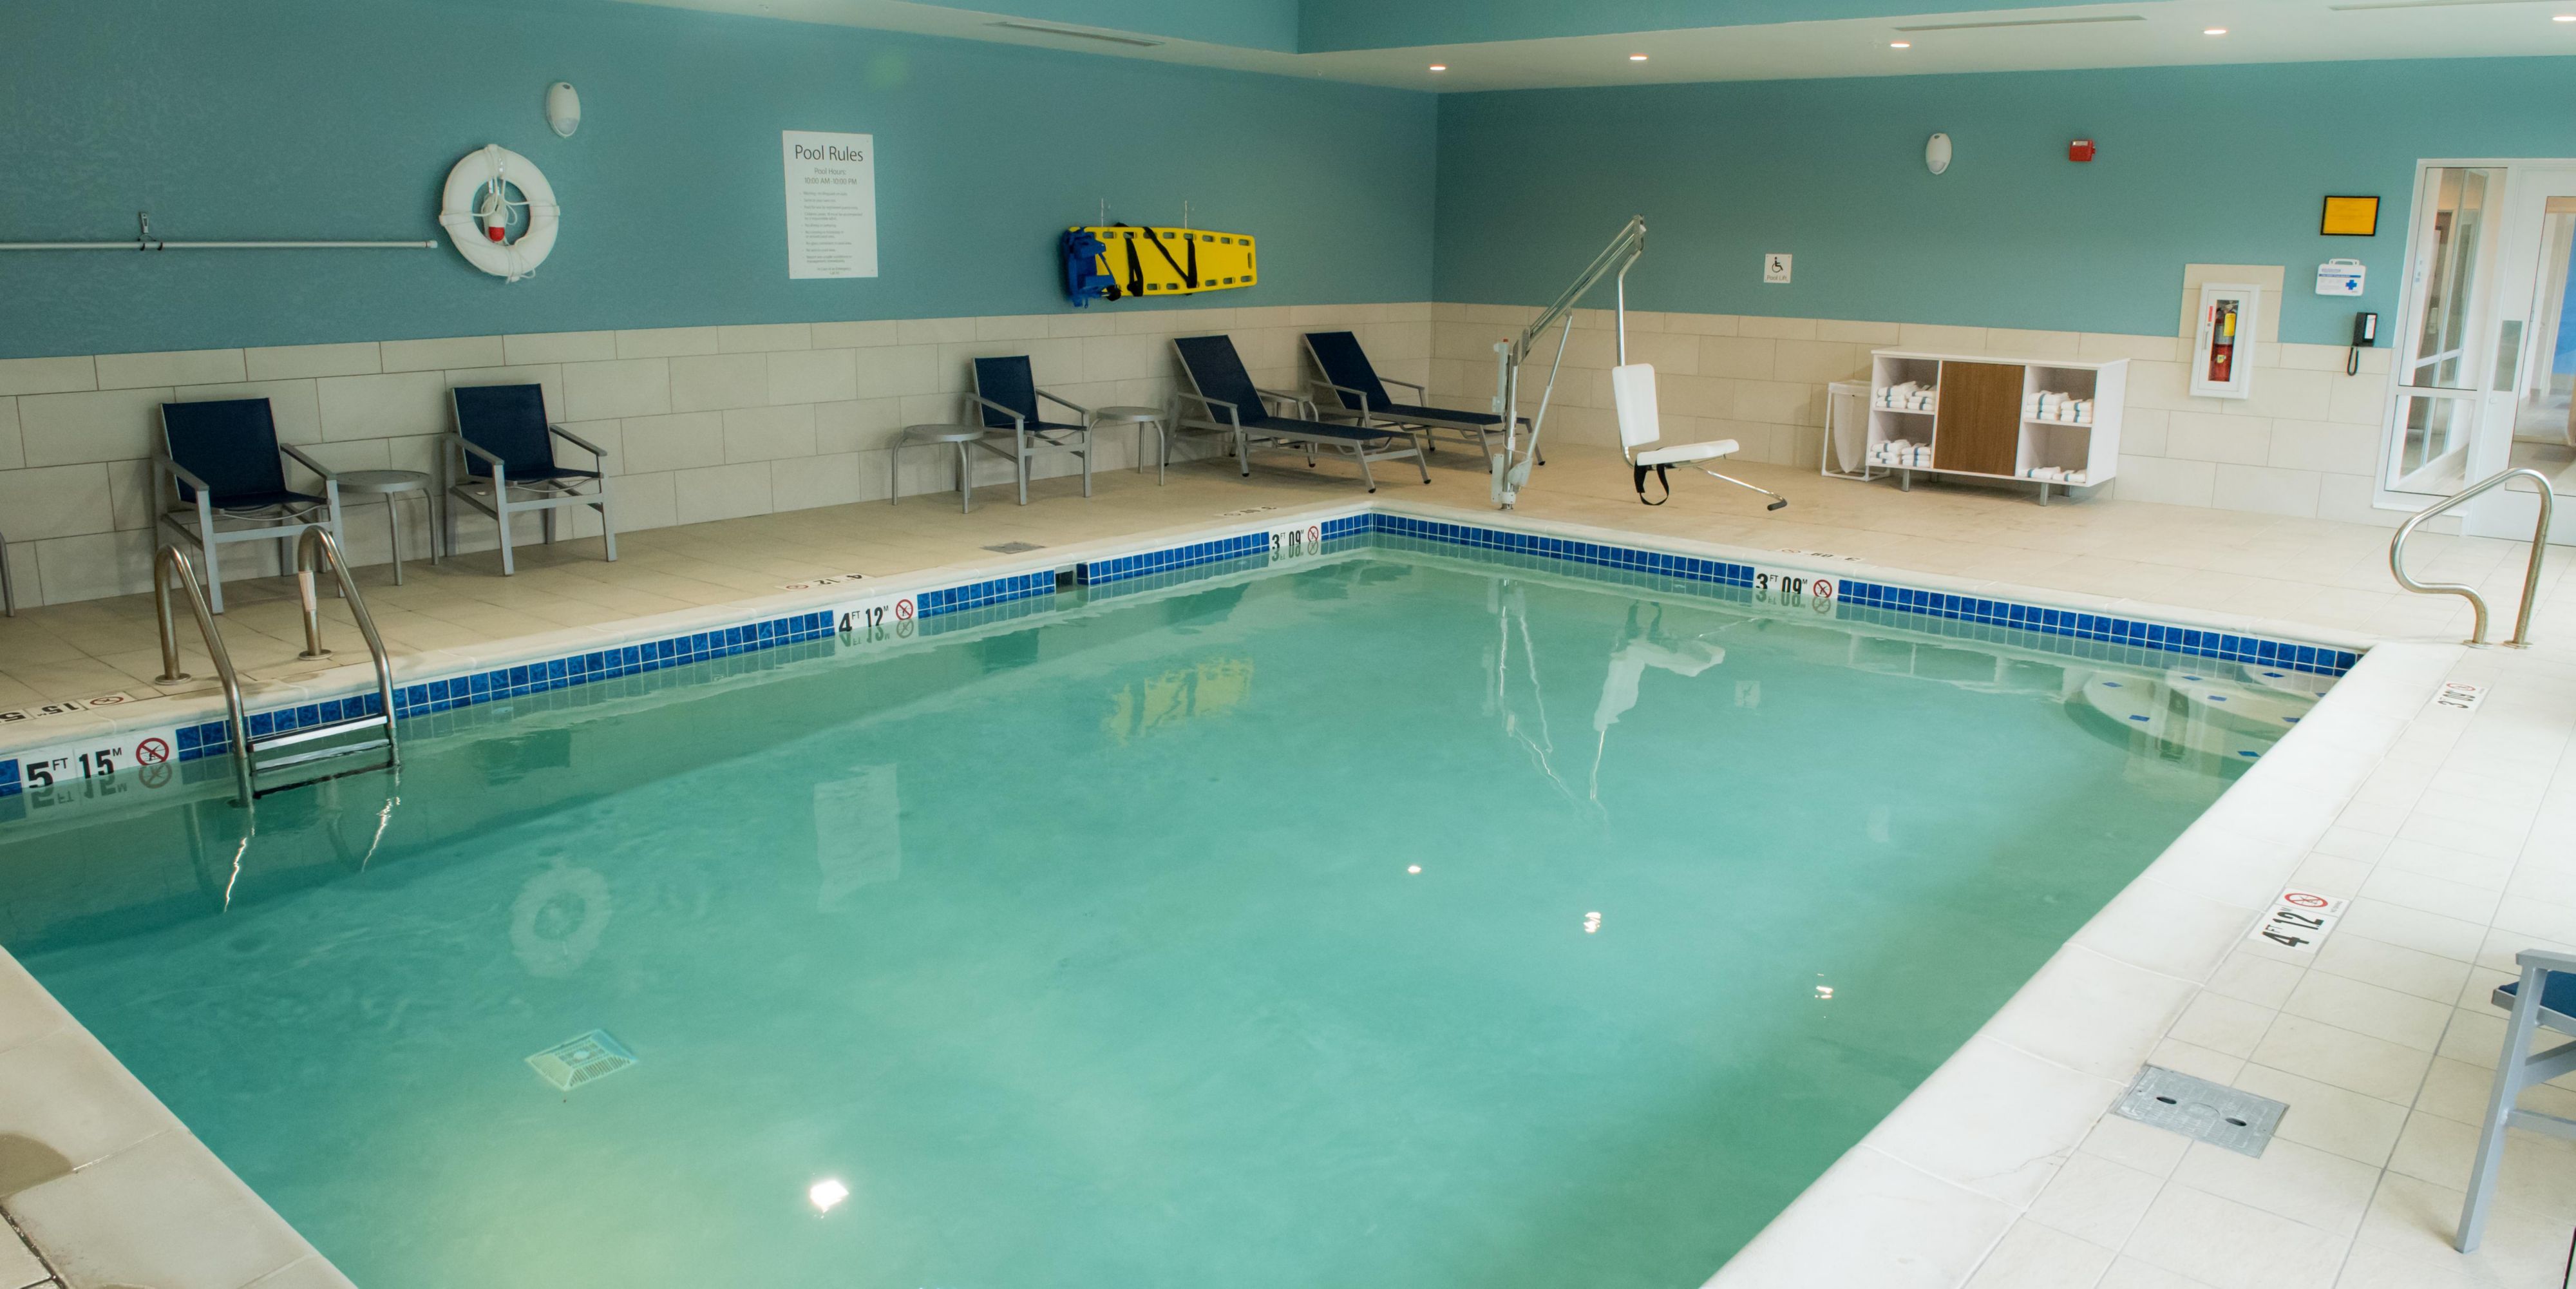 No matter the season, our heated indoor swimming pool is a favorite. Book your room today and enjoy!